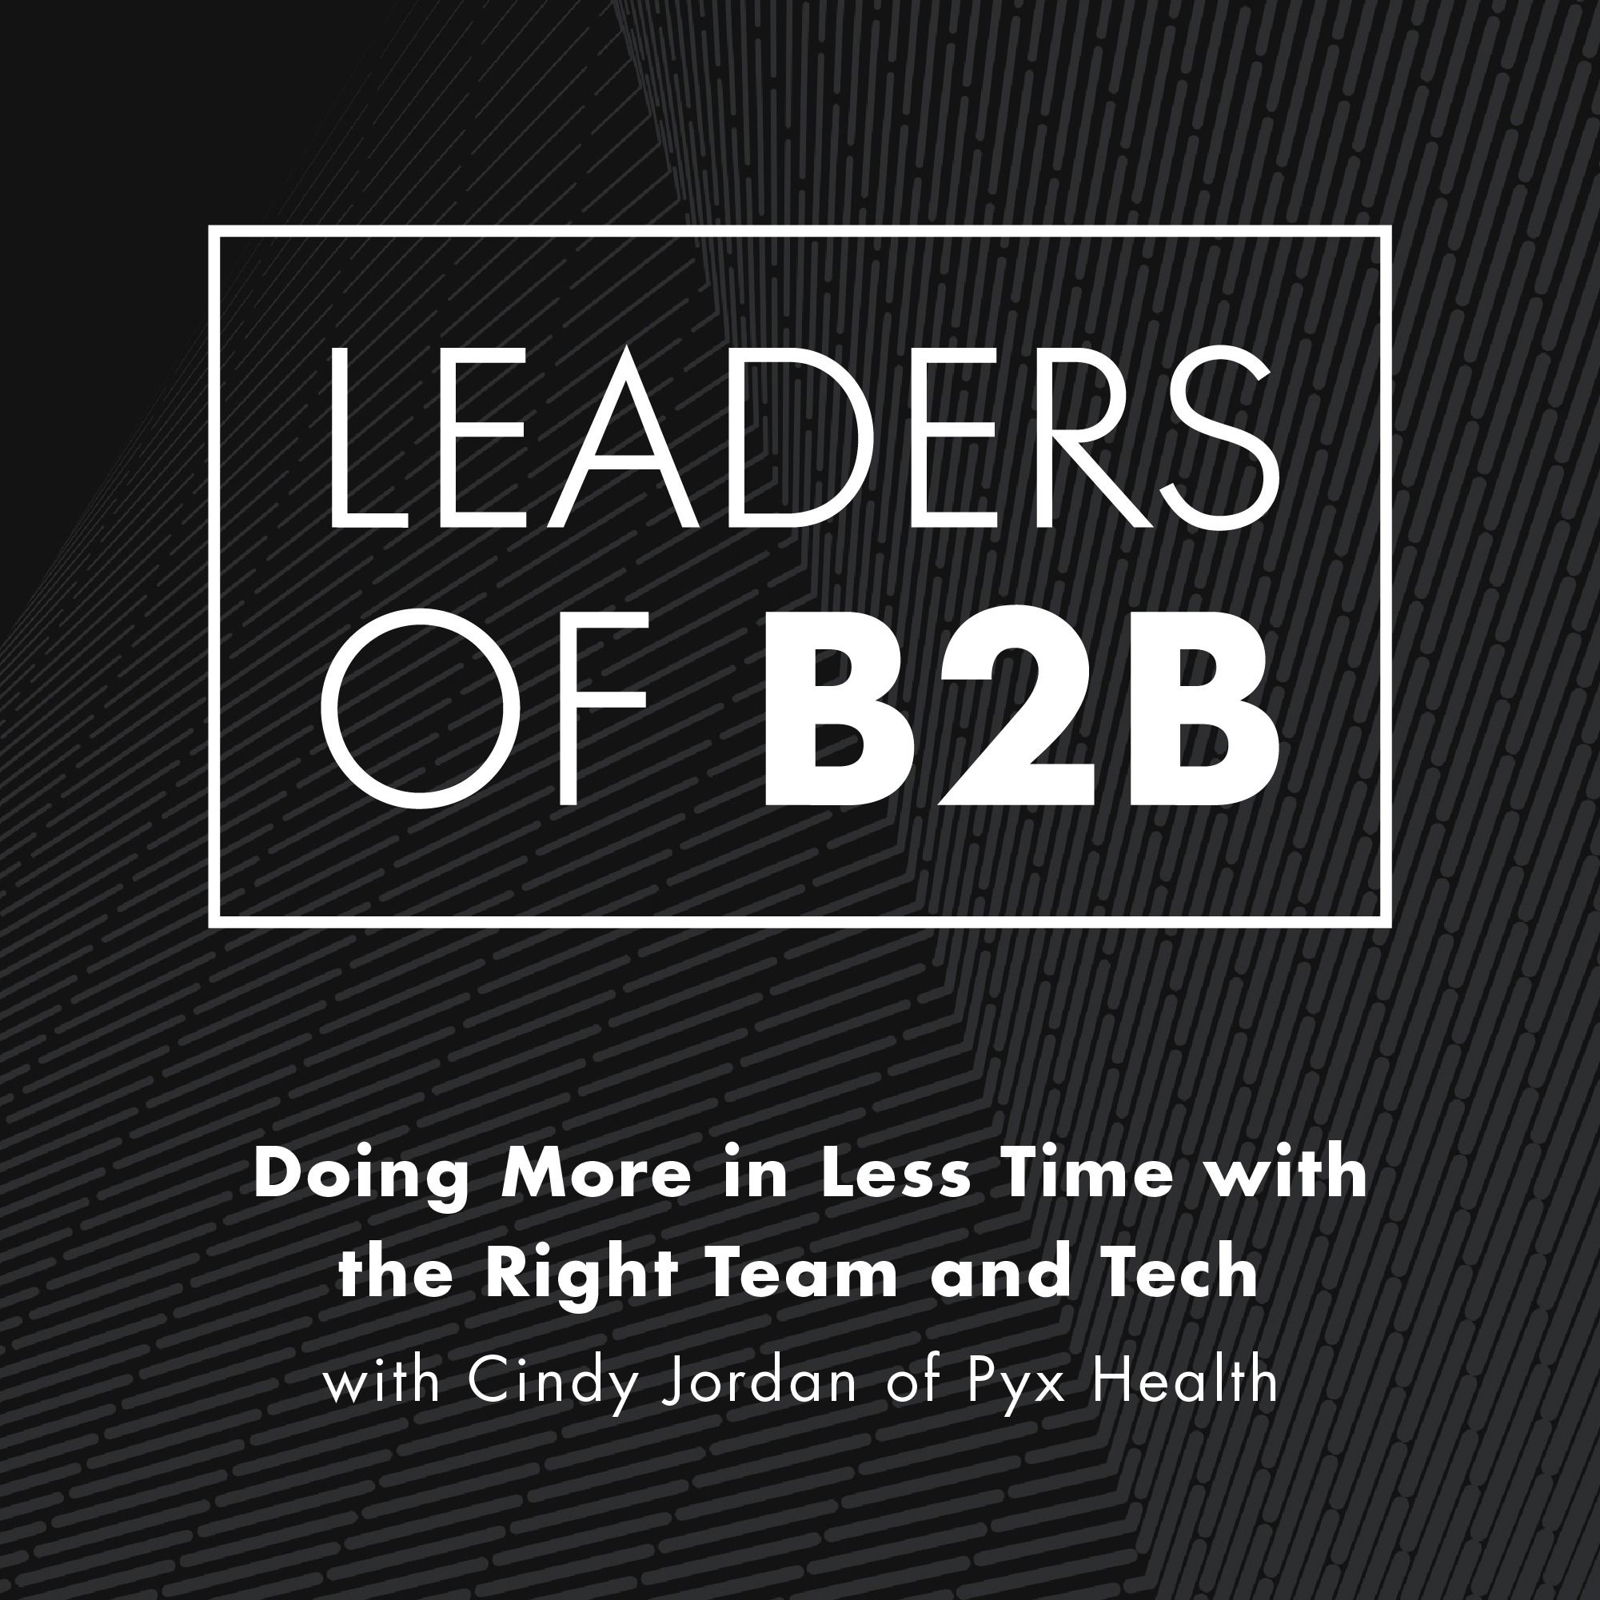 Doing More in Less Time with the Right Team and Tech, with Cindy Jordan of Pyx Health